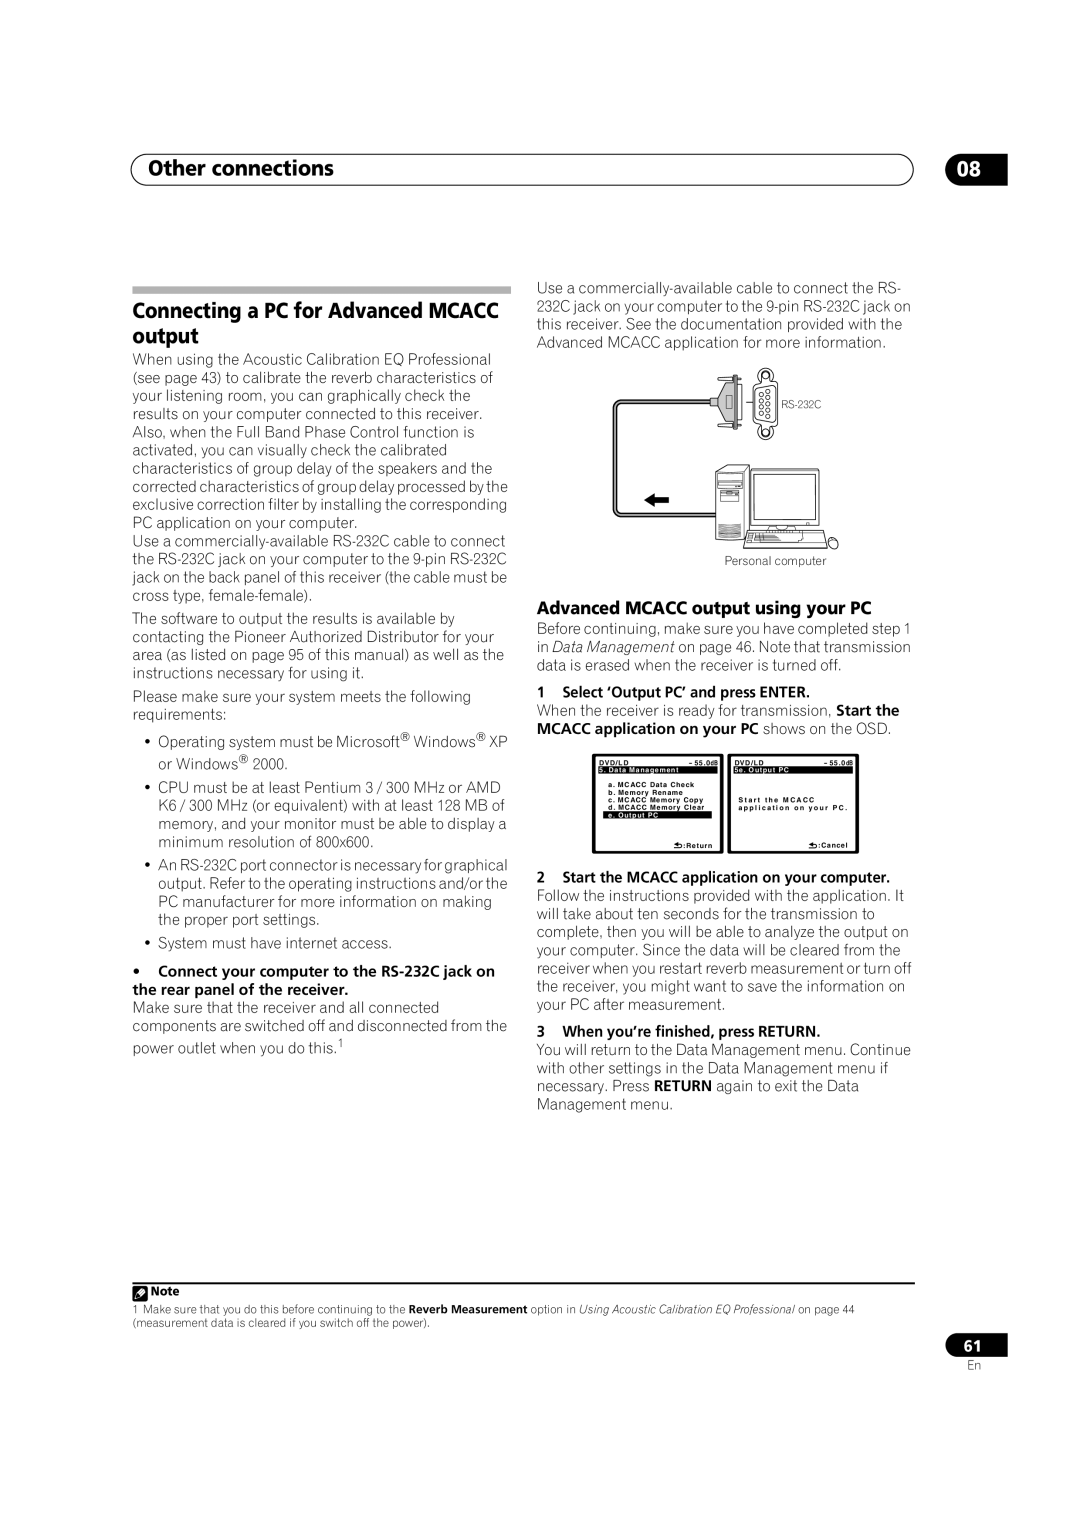 Pioneer VSX-LX70 manual Connecting a PC for Advanced MCACC output, Advanced MCACC output using your PC, Other connections 